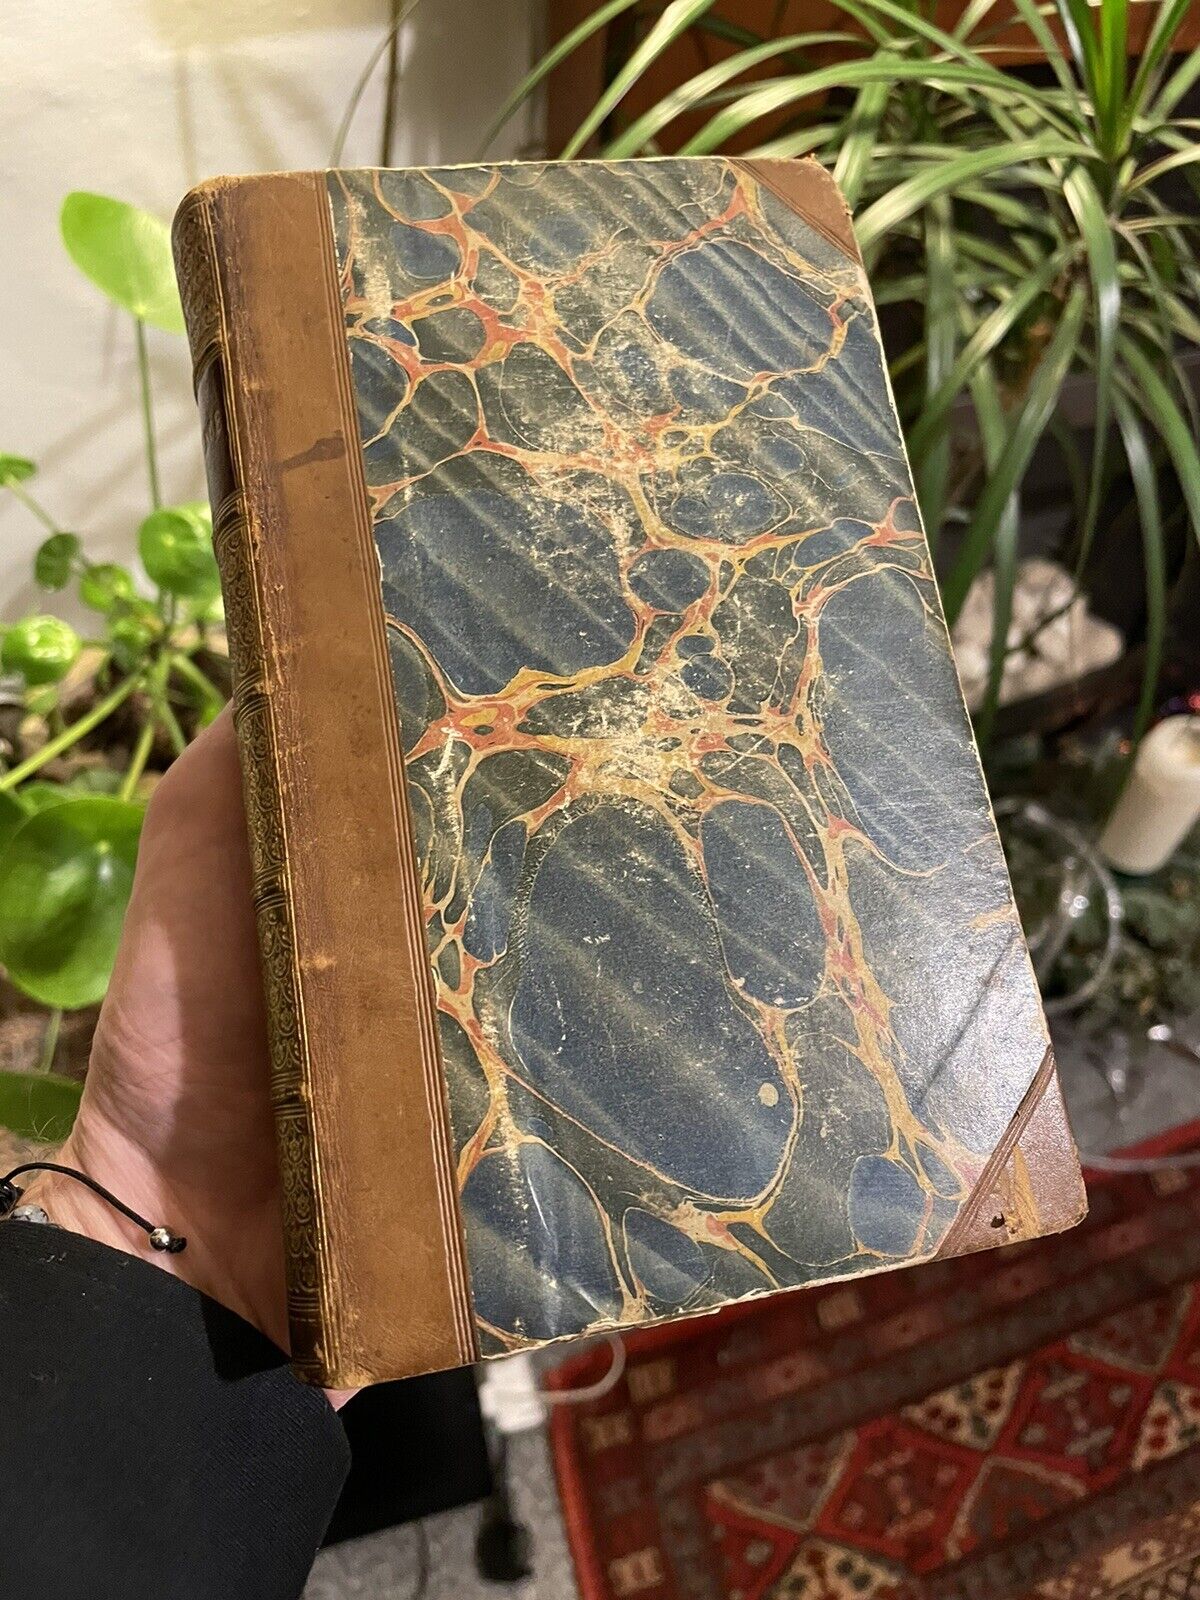 1822 Lectures on Physiology, Zoology and the Natural History of Man : Lawrence